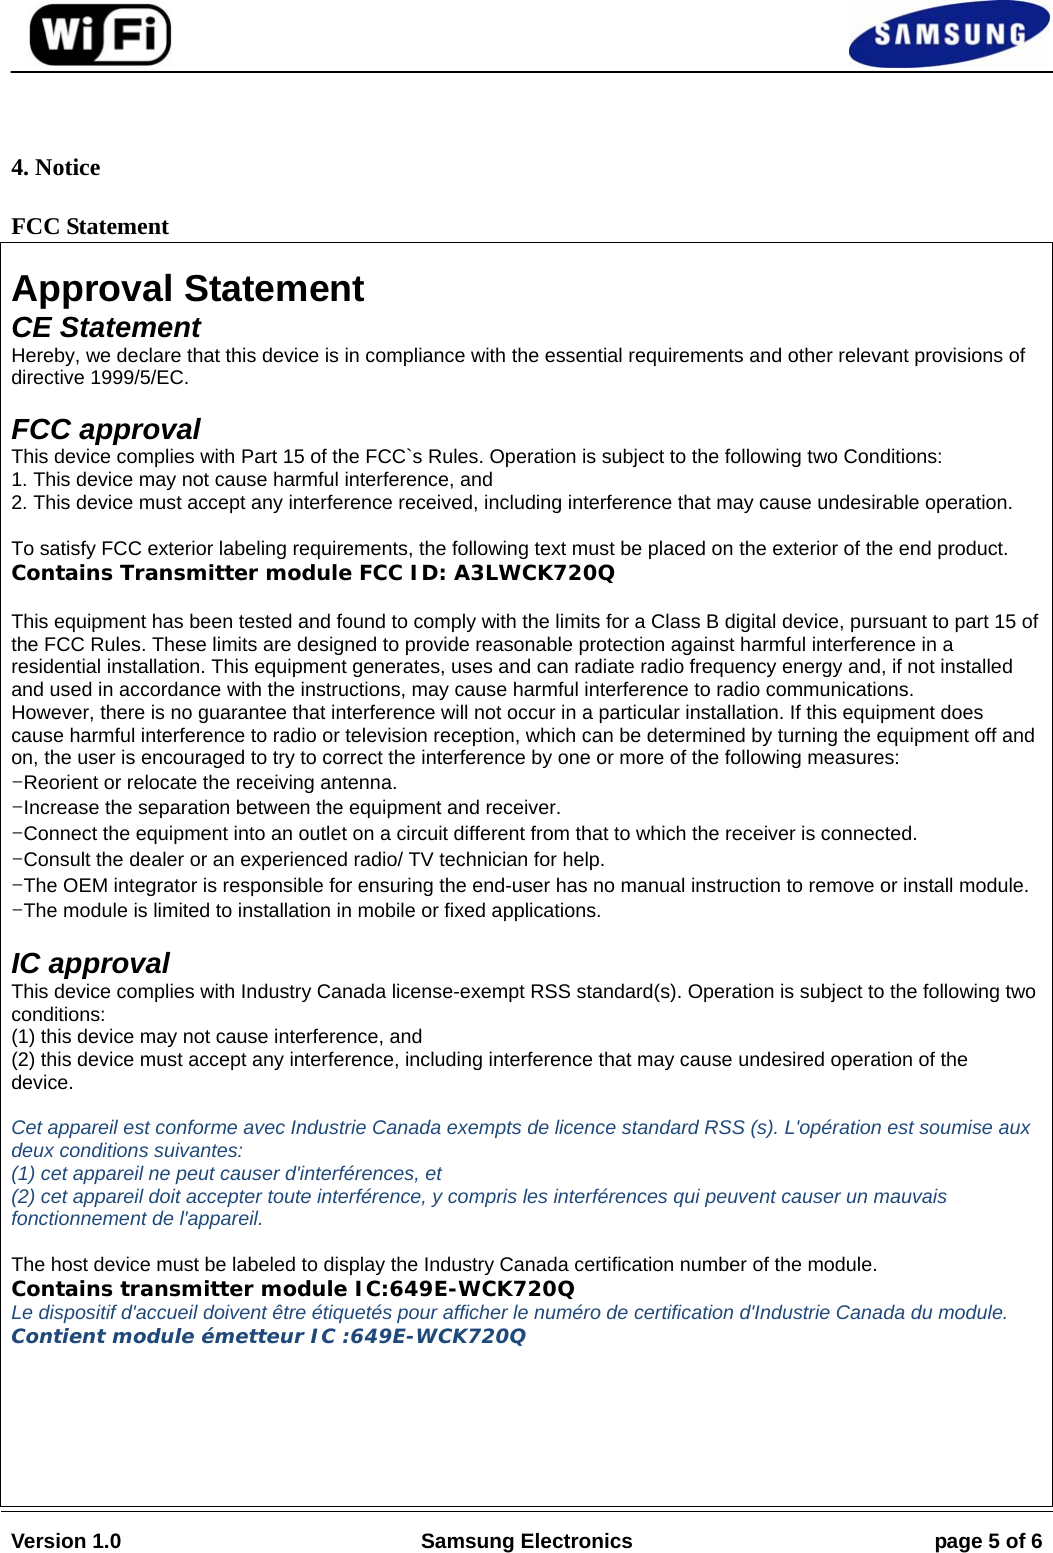                                                                                                                                         Version 1.0  Samsung Electronics  page 5 of 6    4. Notice FCC Statement  Approval Statement CE Statement Hereby, we declare that this device is in compliance with the essential requirements and other relevant provisions of directive 1999/5/EC.  FCC approval This device complies with Part 15 of the FCC`s Rules. Operation is subject to the following two Conditions: 1. This device may not cause harmful interference, and 2. This device must accept any interference received, including interference that may cause undesirable operation.  To satisfy FCC exterior labeling requirements, the following text must be placed on the exterior of the end product. Contains Transmitter module FCC ID: A3LWCK720Q  This equipment has been tested and found to comply with the limits for a Class B digital device, pursuant to part 15 ofthe FCC Rules. These limits are designed to provide reasonable protection against harmful interference in a residential installation. This equipment generates, uses and can radiate radio frequency energy and, if not installed and used in accordance with the instructions, may cause harmful interference to radio communications. However, there is no guarantee that interference will not occur in a particular installation. If this equipment does cause harmful interference to radio or television reception, which can be determined by turning the equipment off andon, the user is encouraged to try to correct the interference by one or more of the following measures: -Reorient or relocate the receiving antenna. -Increase the separation between the equipment and receiver. -Connect the equipment into an outlet on a circuit different from that to which the receiver is connected. -Consult the dealer or an experienced radio/ TV technician for help. -The OEM integrator is responsible for ensuring the end-user has no manual instruction to remove or install module. -The module is limited to installation in mobile or fixed applications.  IC approval This device complies with Industry Canada license-exempt RSS standard(s). Operation is subject to the following twoconditions: (1) this device may not cause interference, and (2) this device must accept any interference, including interference that may cause undesired operation of the device.  Cet appareil est conforme avec Industrie Canada exempts de licence standard RSS (s). L&apos;opération est soumise aux deux conditions suivantes: (1) cet appareil ne peut causer d&apos;interférences, et (2) cet appareil doit accepter toute interférence, y compris les interférences qui peuvent causer un mauvais fonctionnement de l&apos;appareil.  The host device must be labeled to display the Industry Canada certification number of the module. Contains transmitter module IC:649E-WCK720Q Le dispositif d&apos;accueil doivent être étiquetés pour afficher le numéro de certification d&apos;Industrie Canada du module. Contient module émetteur IC :649E-WCK720Q       